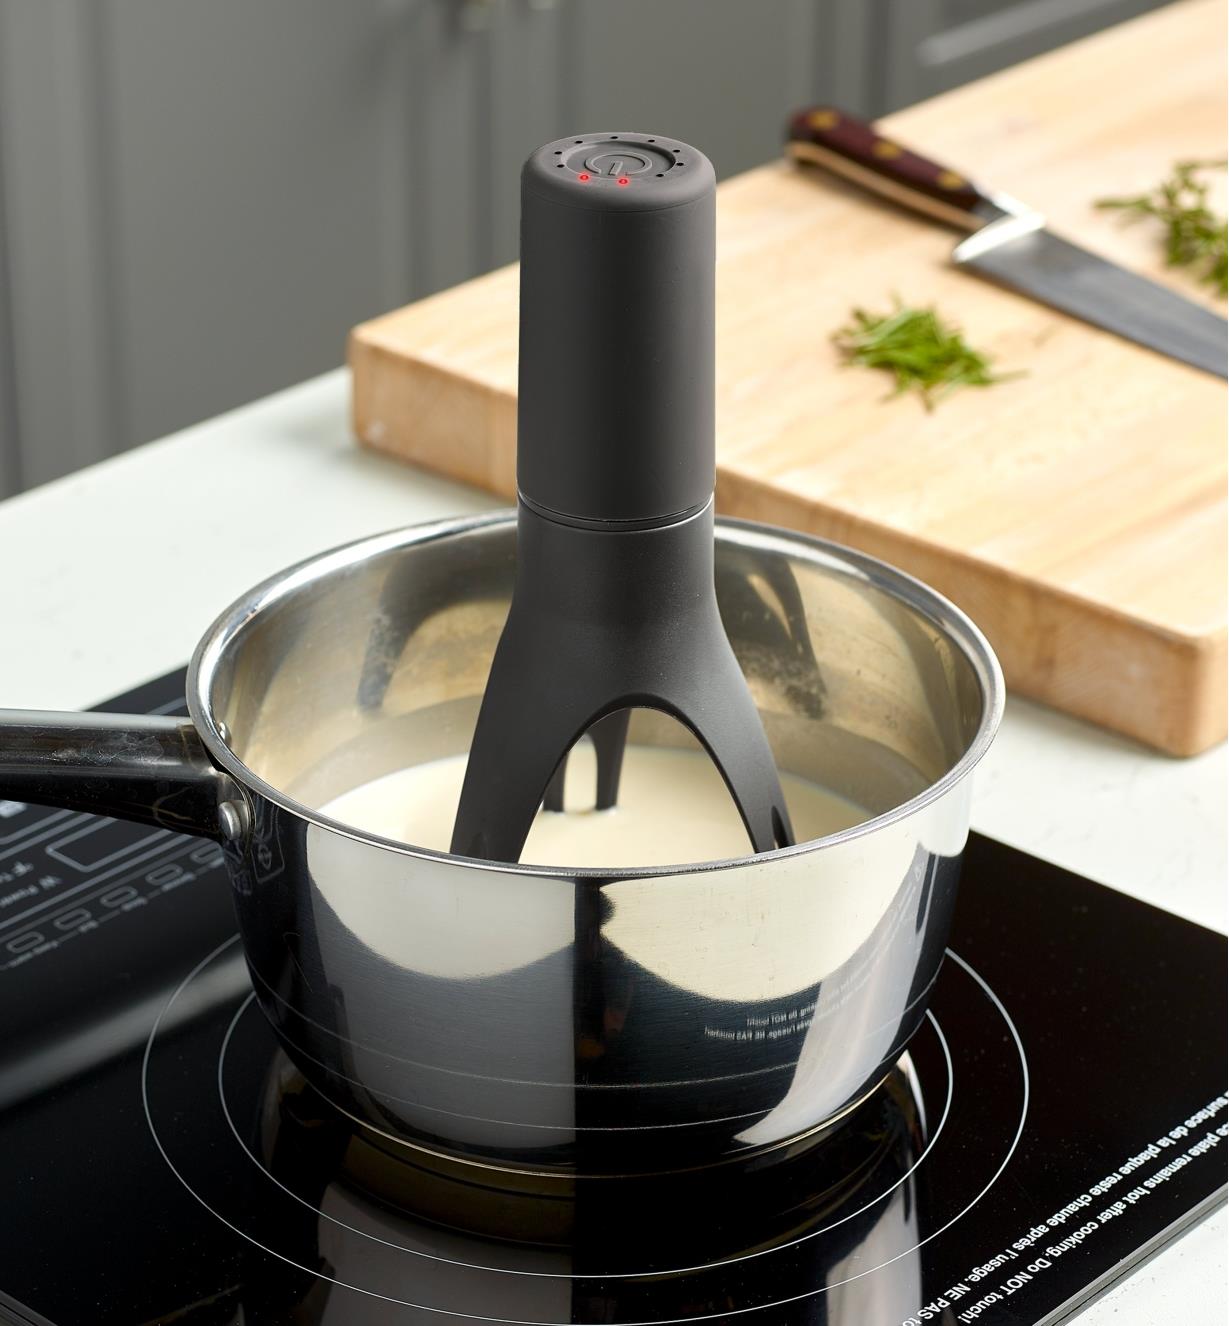 Auto-Stirrer in a pot on a stove